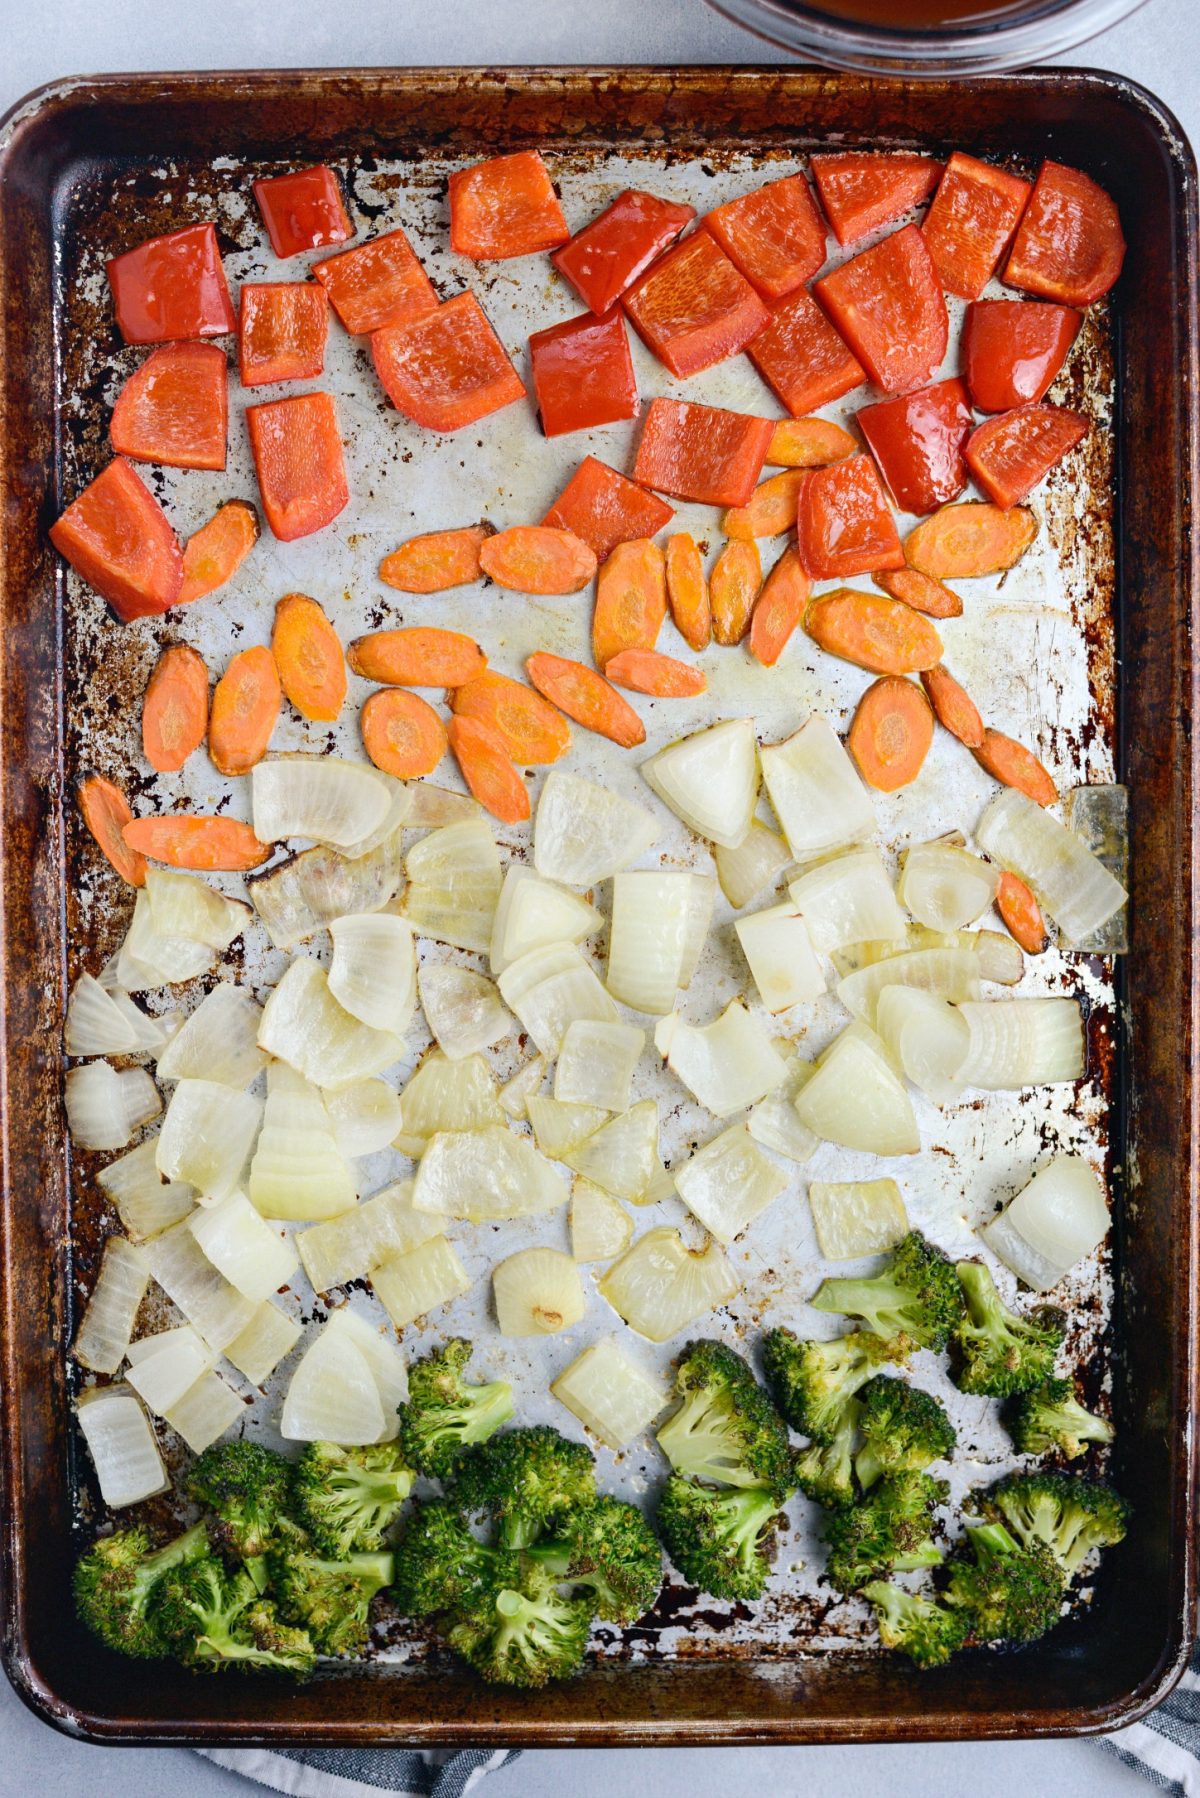 chopped red bell pepper, slice carrots, chopped onions and broccoli florets roasted